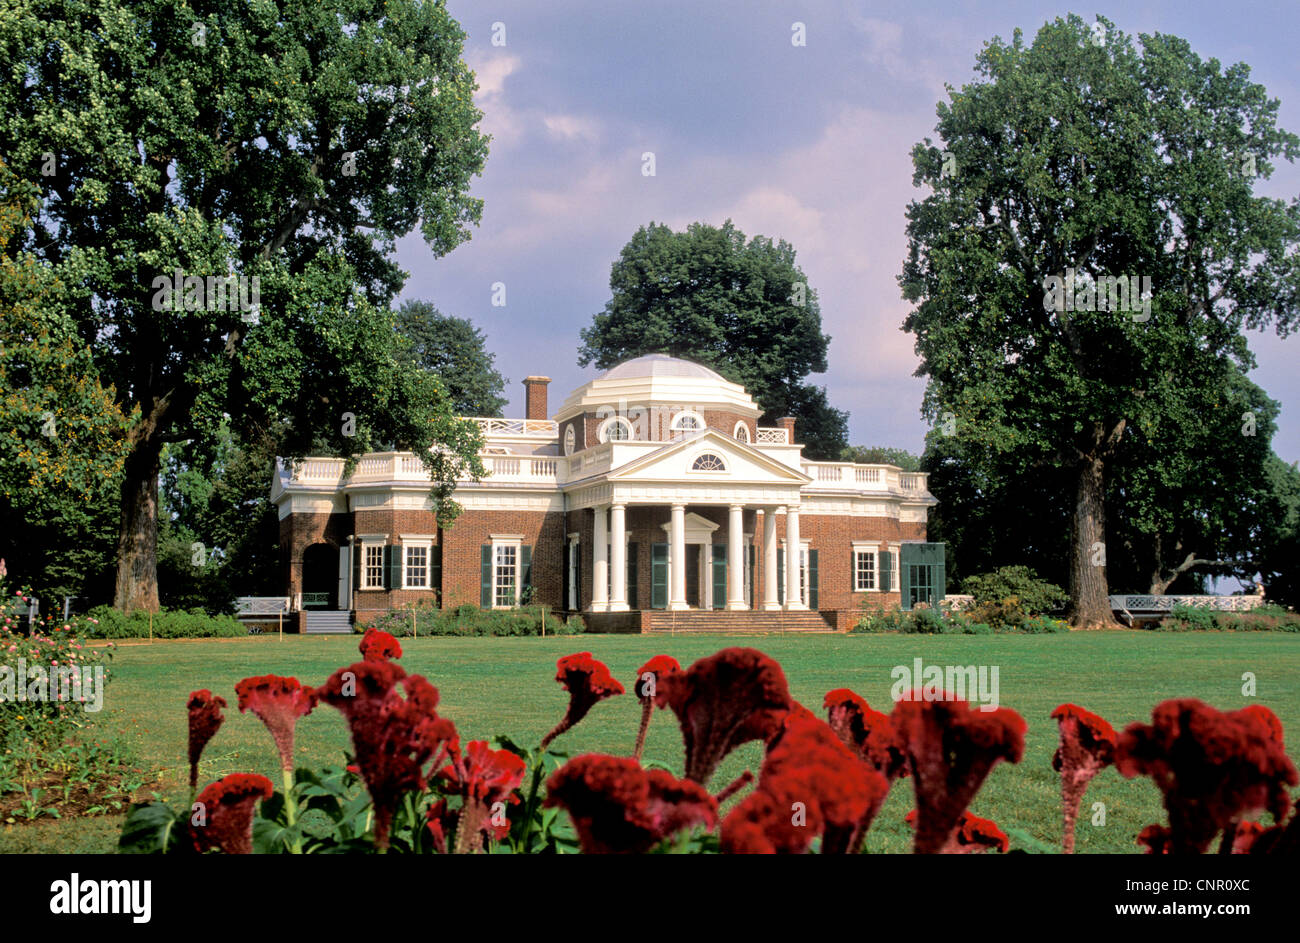 Monticello Plantation, home of President Thomas Jefferson,  showing the columns and dome of the West Front with tulips. Stock Photo